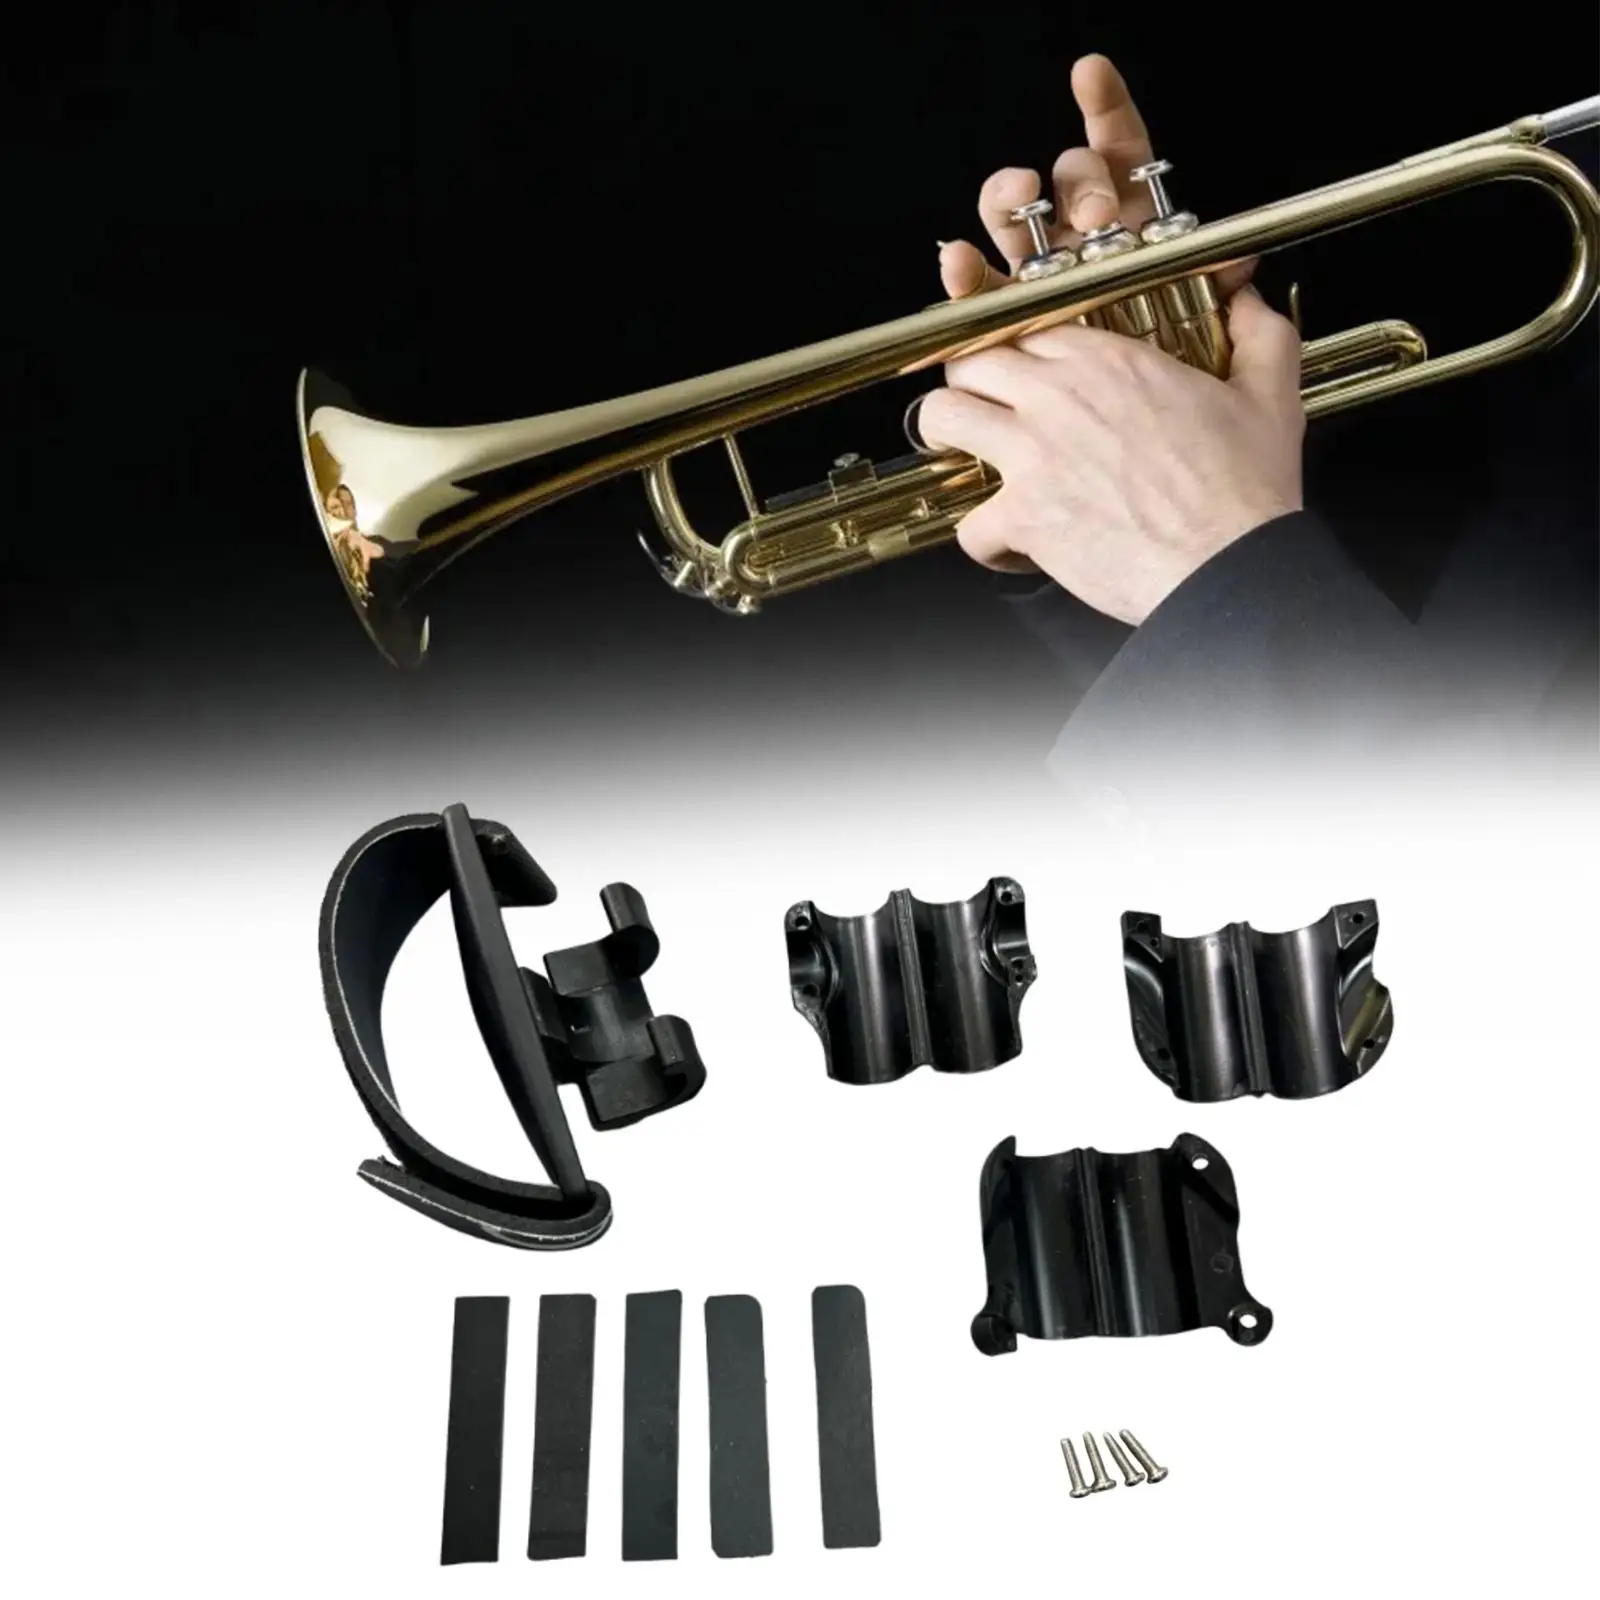 Trombone Grip Can Balance The Instrument Protection Attachments Musician Gifts Cleaning Care Accessories with Screws and Straps